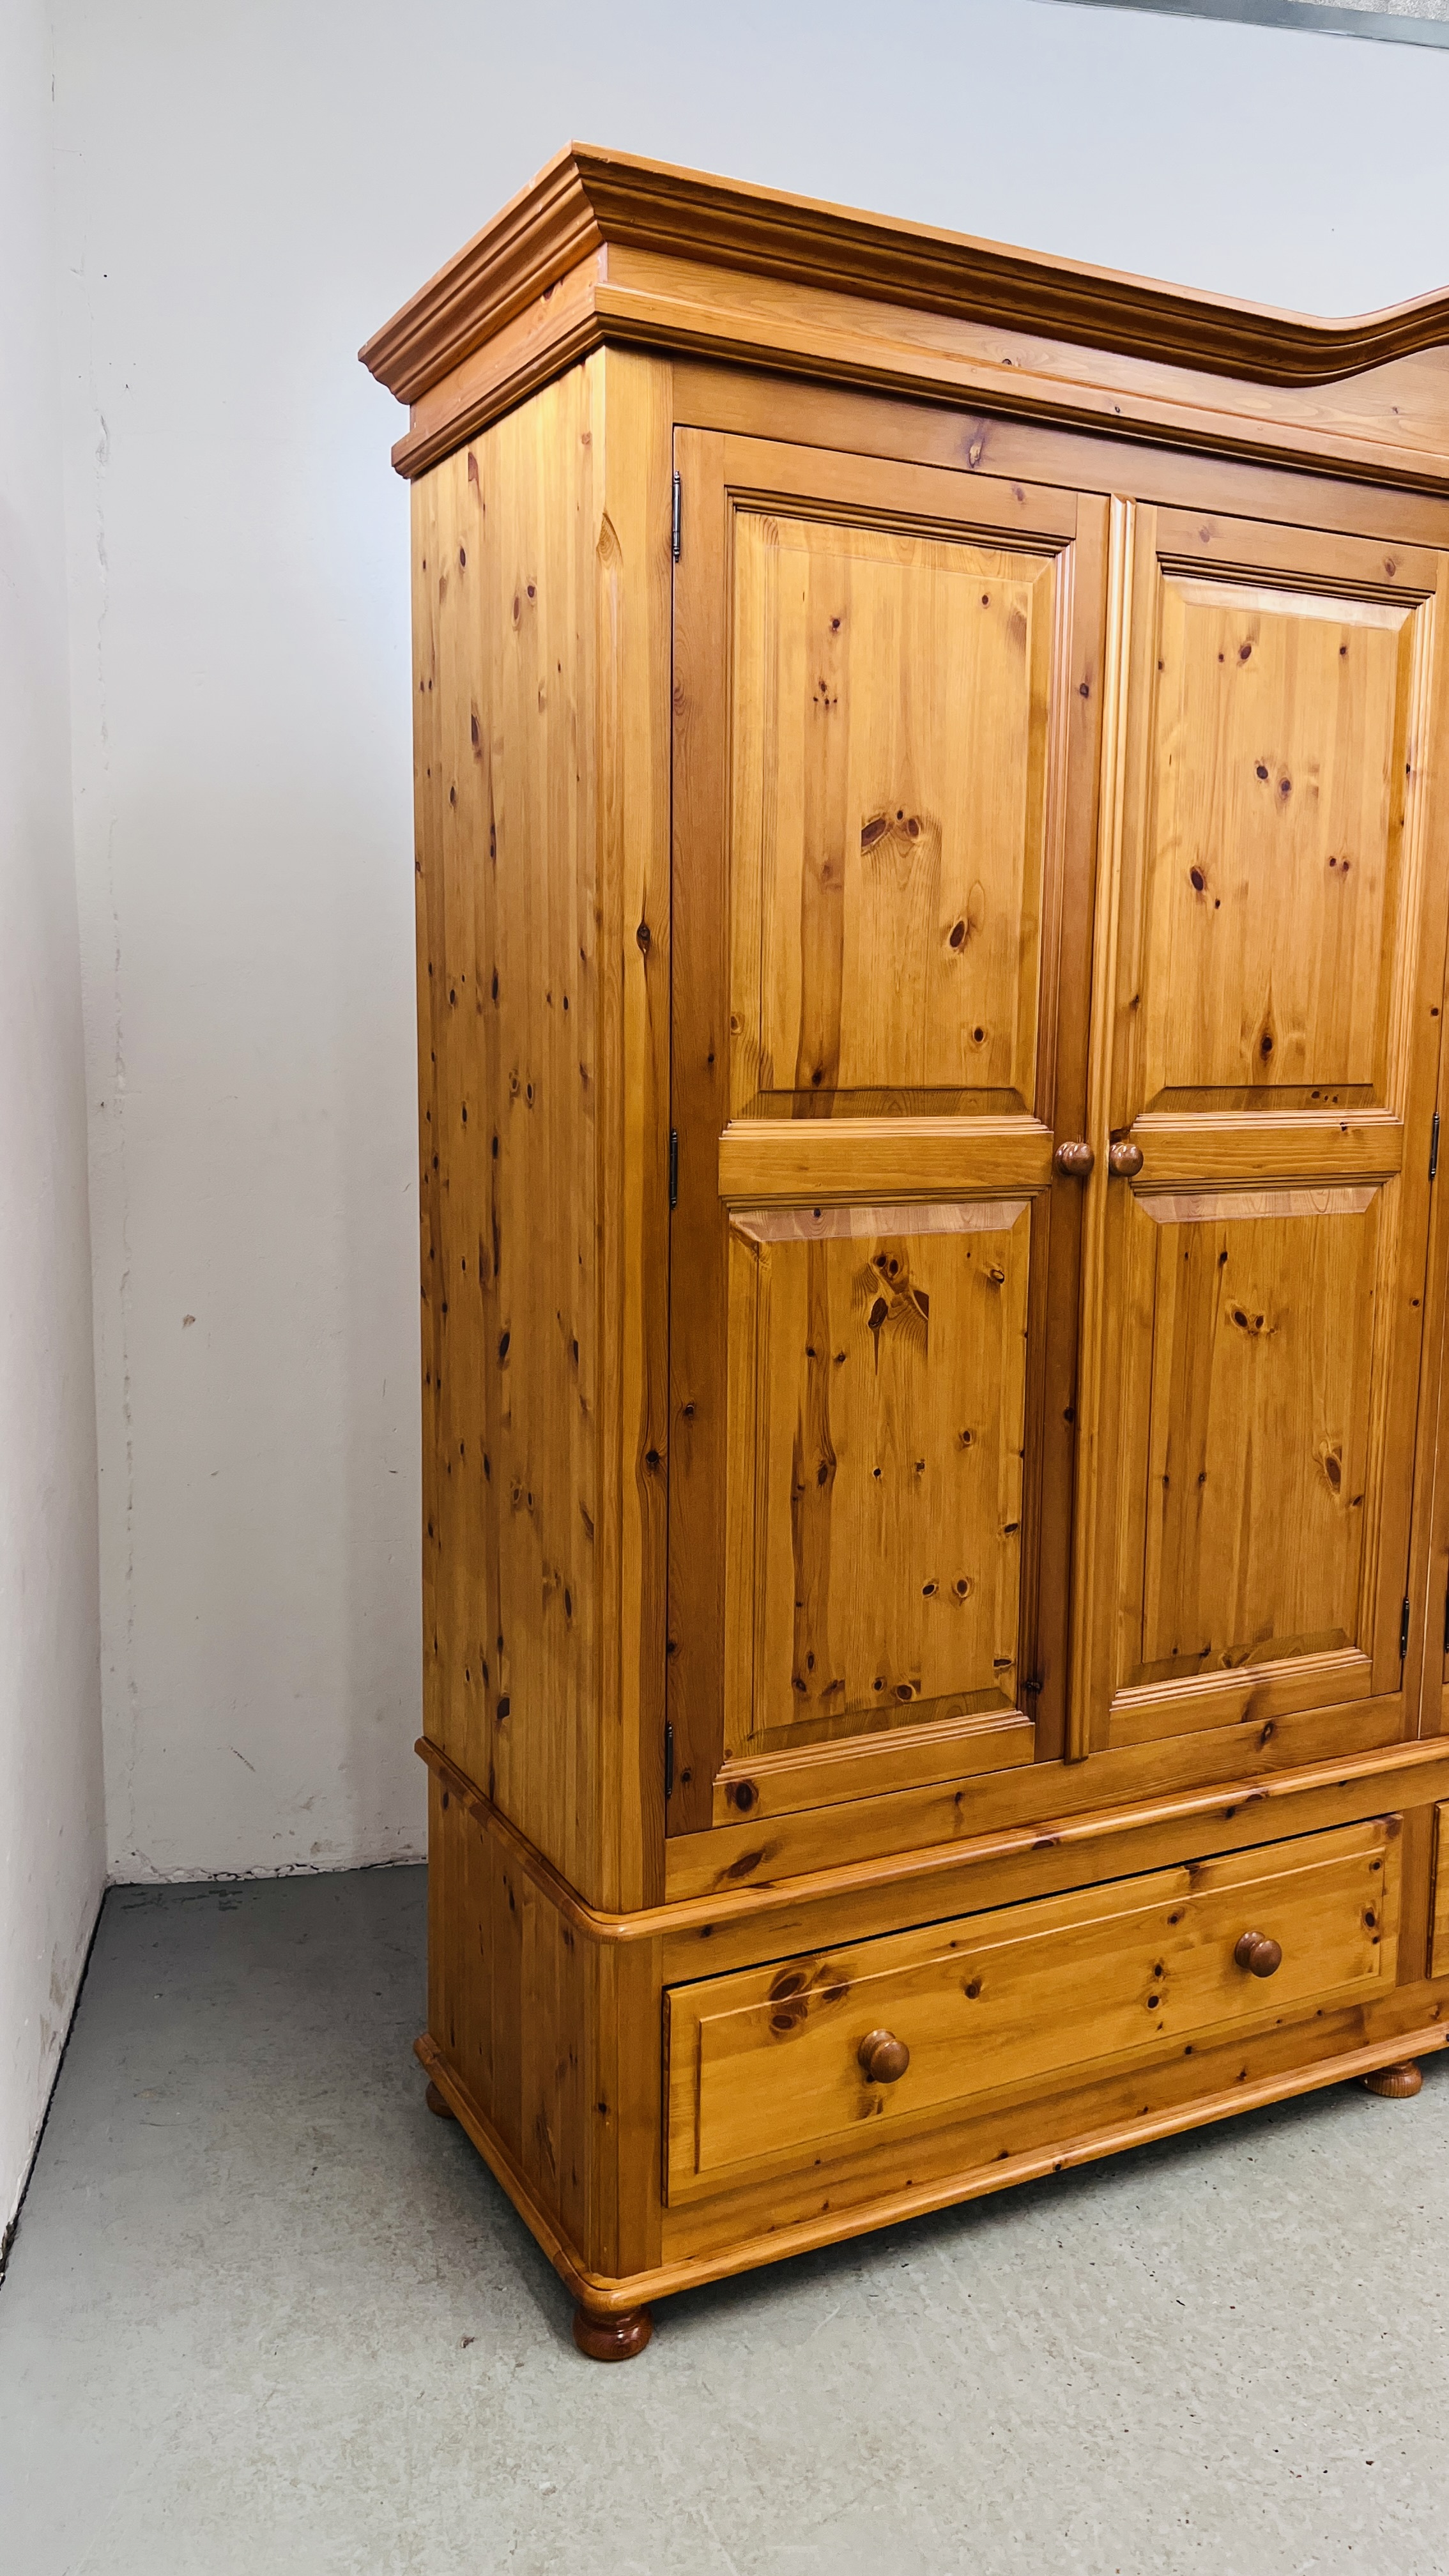 A GOOD QUALITY HONEY PINE FOUR DOOR WARDROBE WITH TWO DRAWER BASE WIDTH 228CM. DEPTH 59CM. - Image 3 of 14